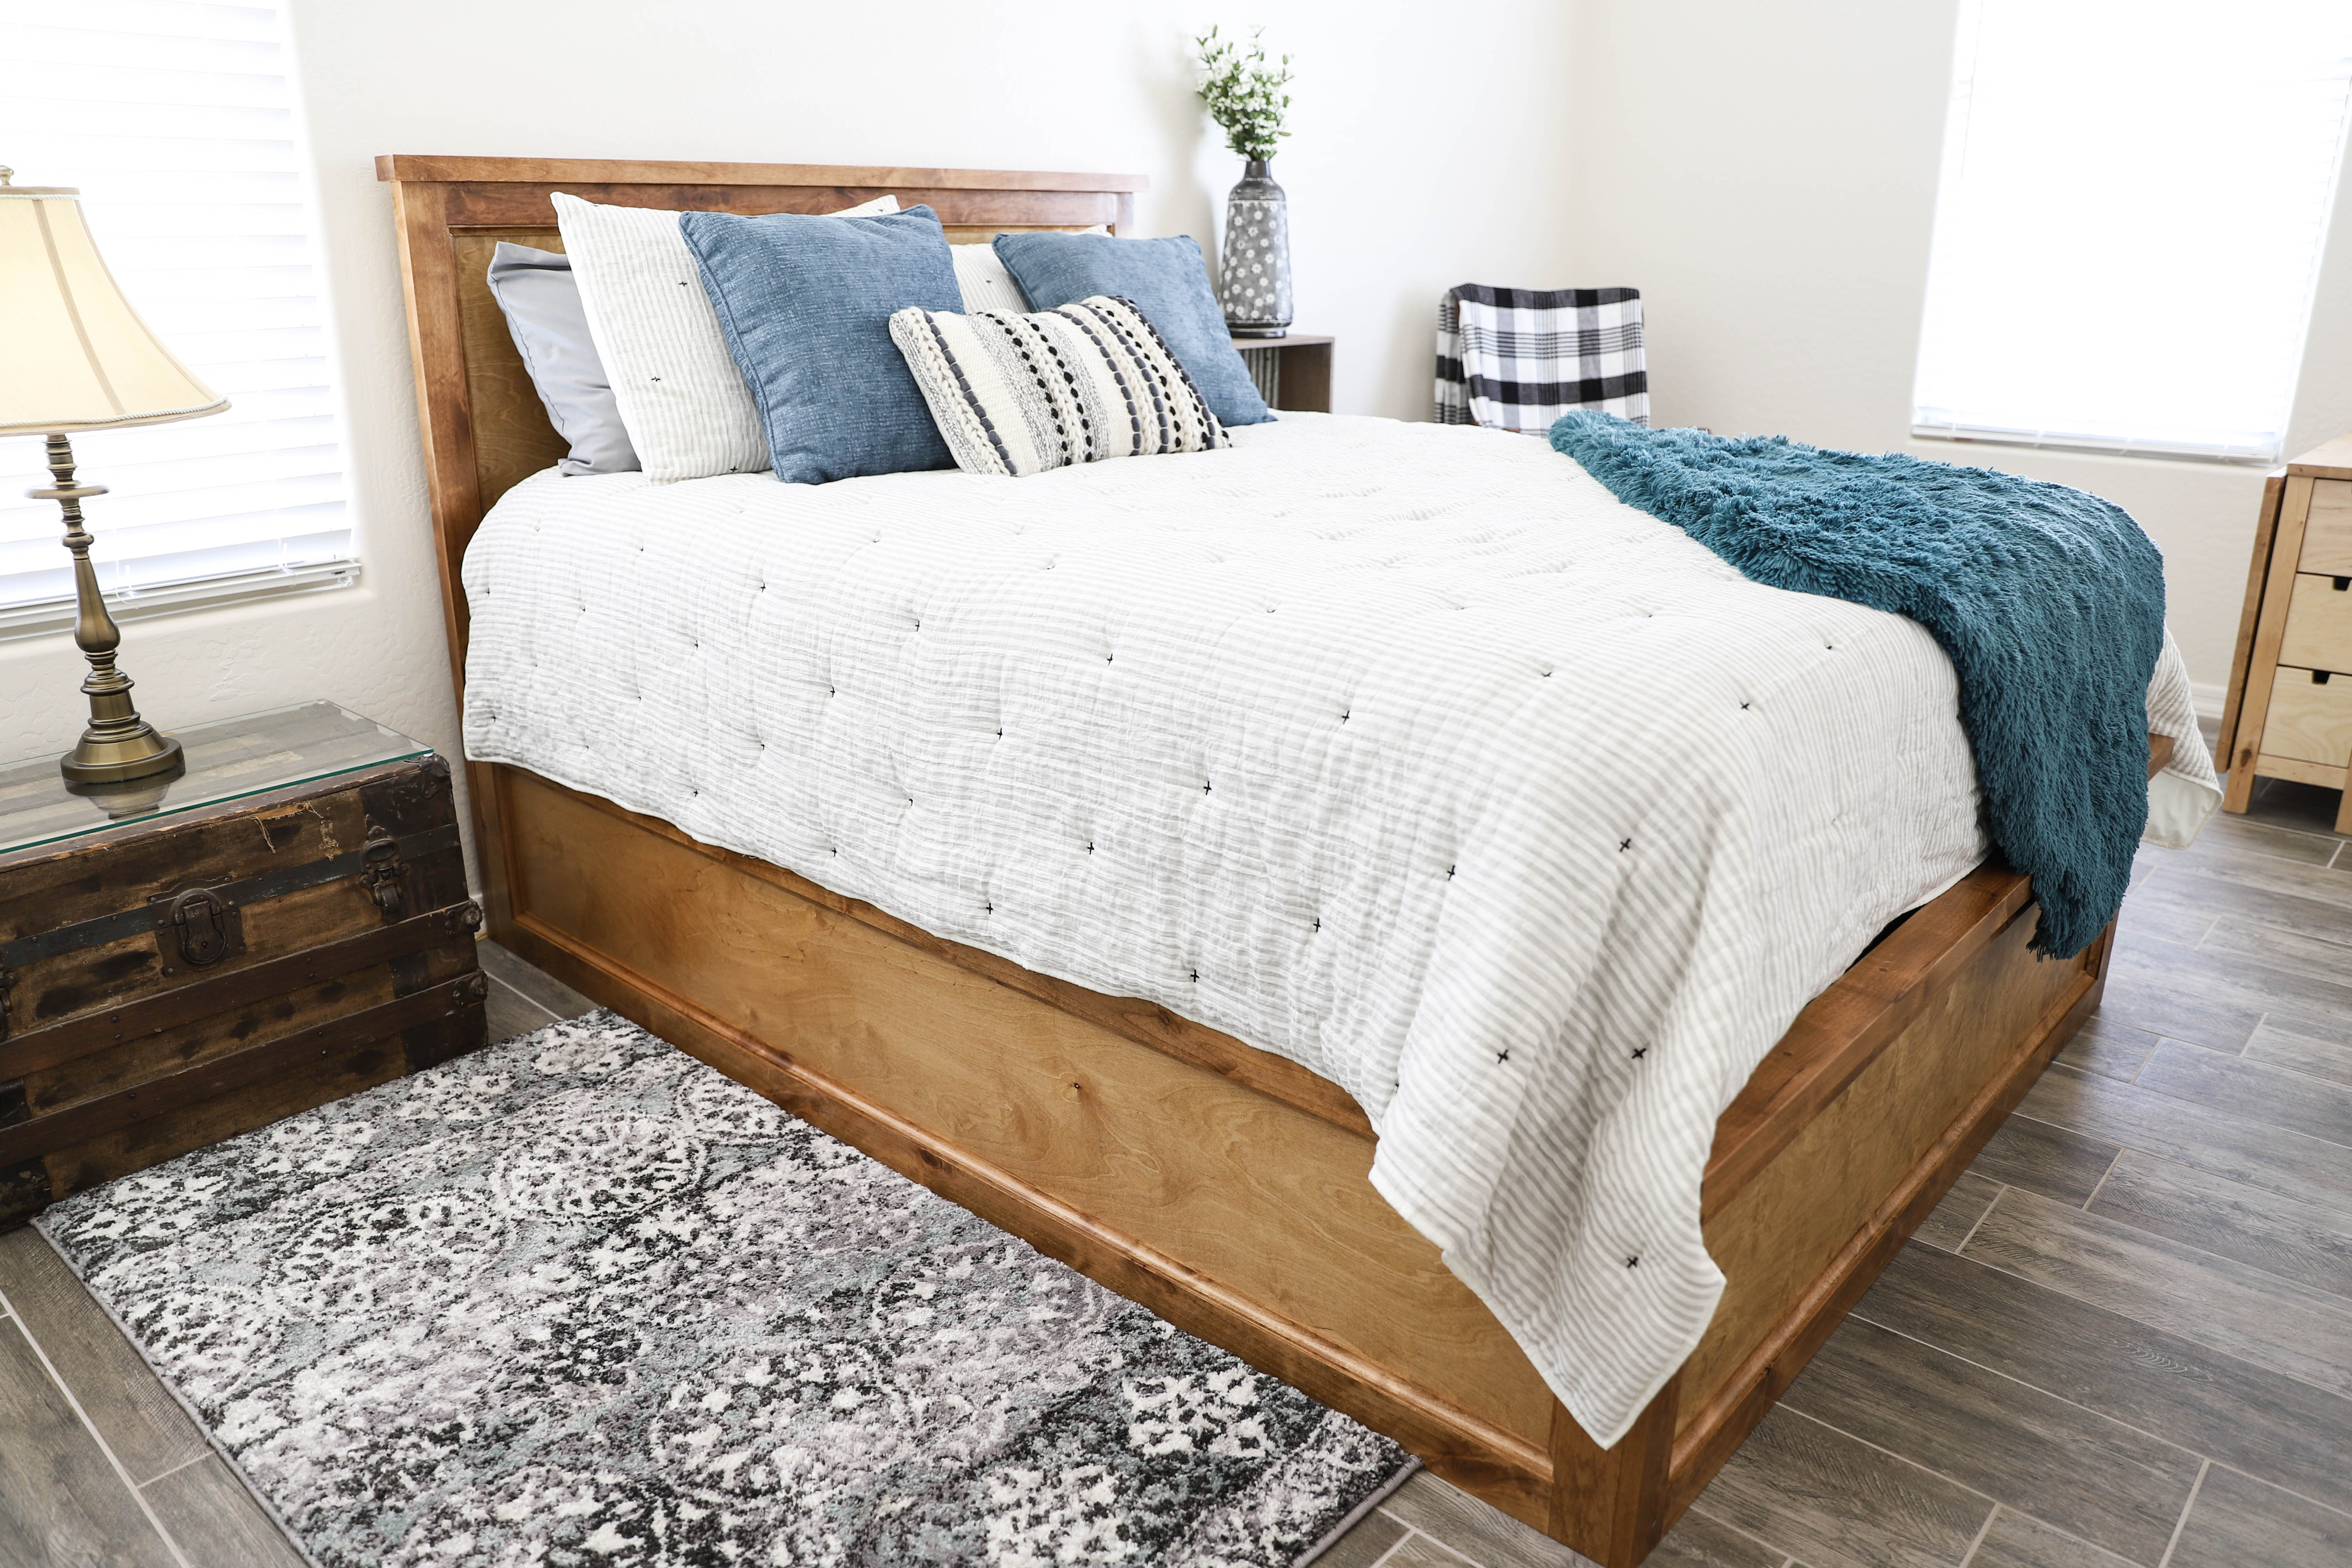 How To Build A Queen Size Storage Bed, Lift Up Storage Bed Frame Queen